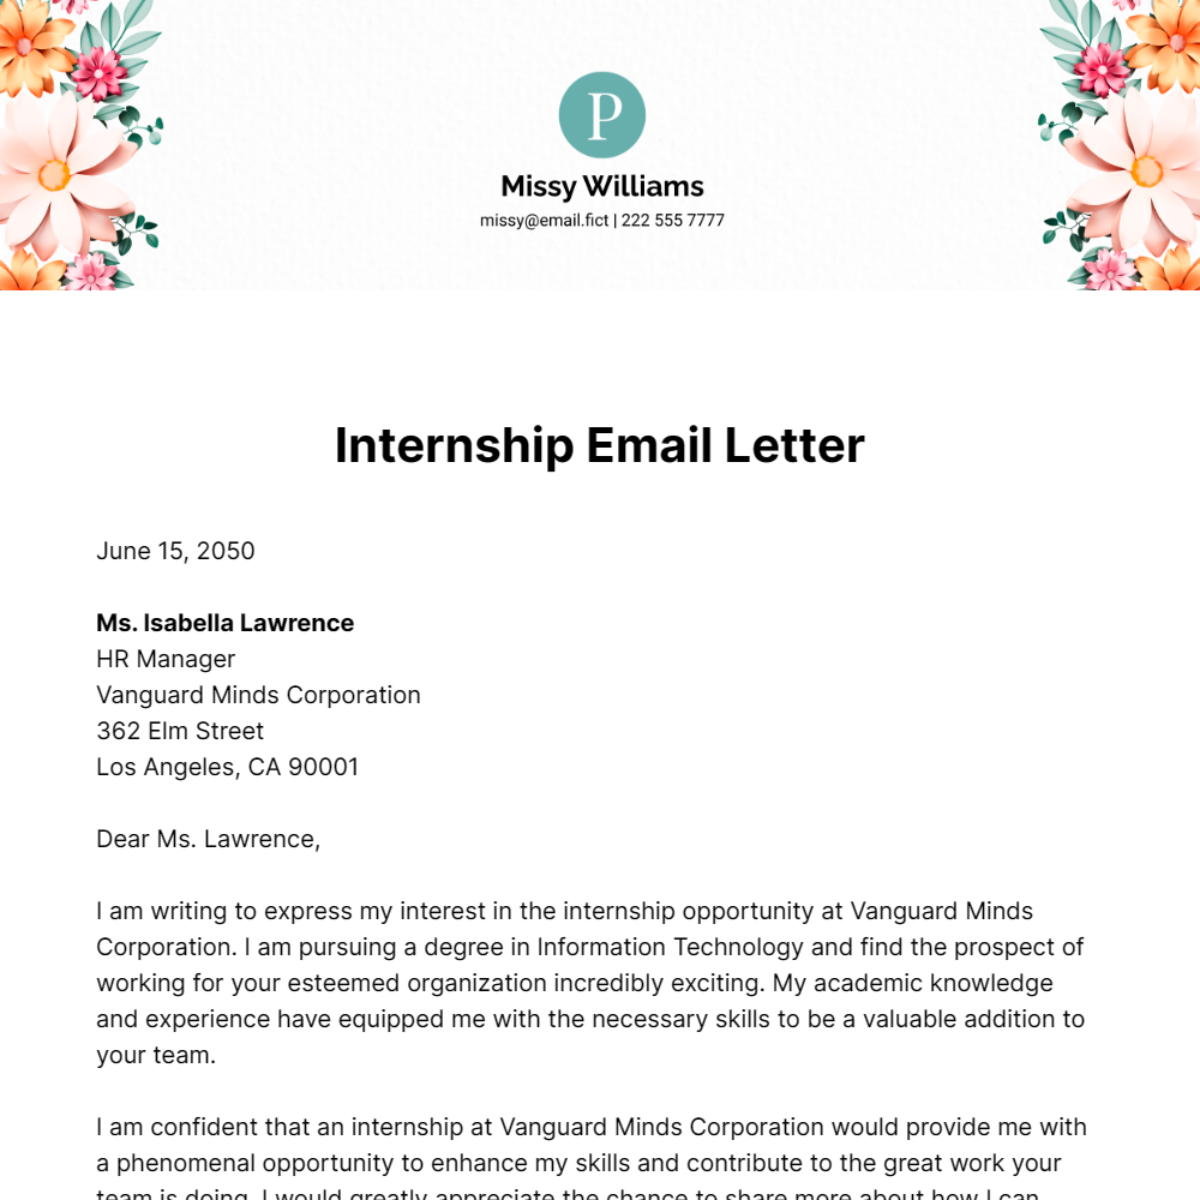 Internship Email Letter Template